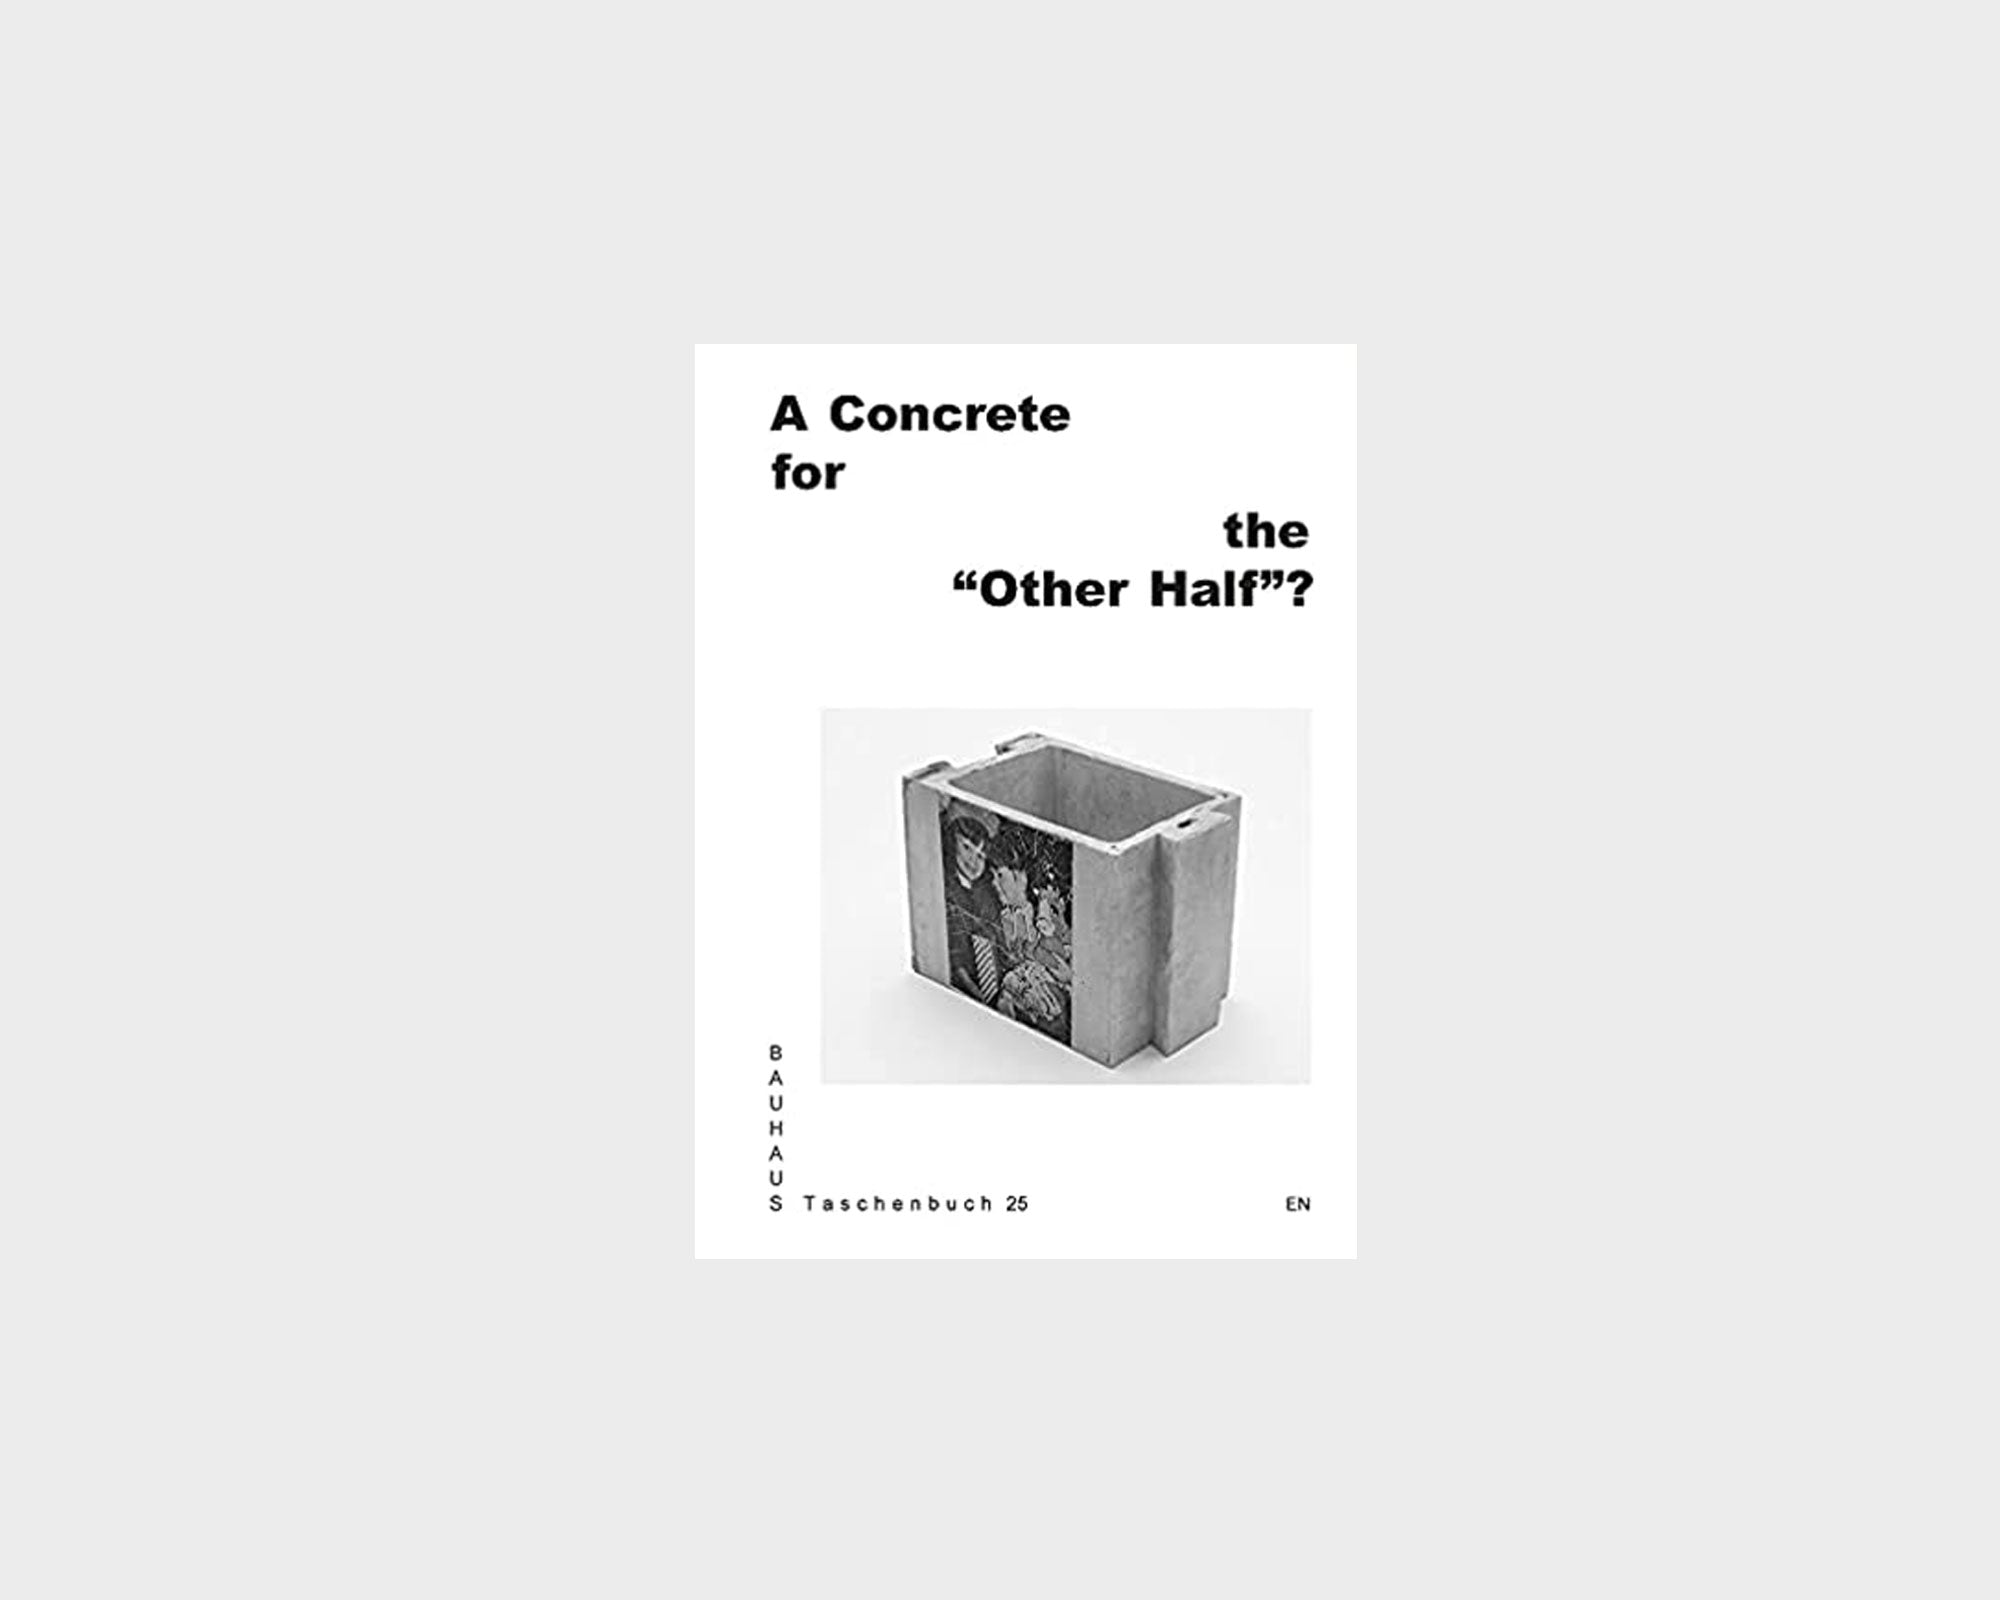 A Concrete for the ”Other Half“?